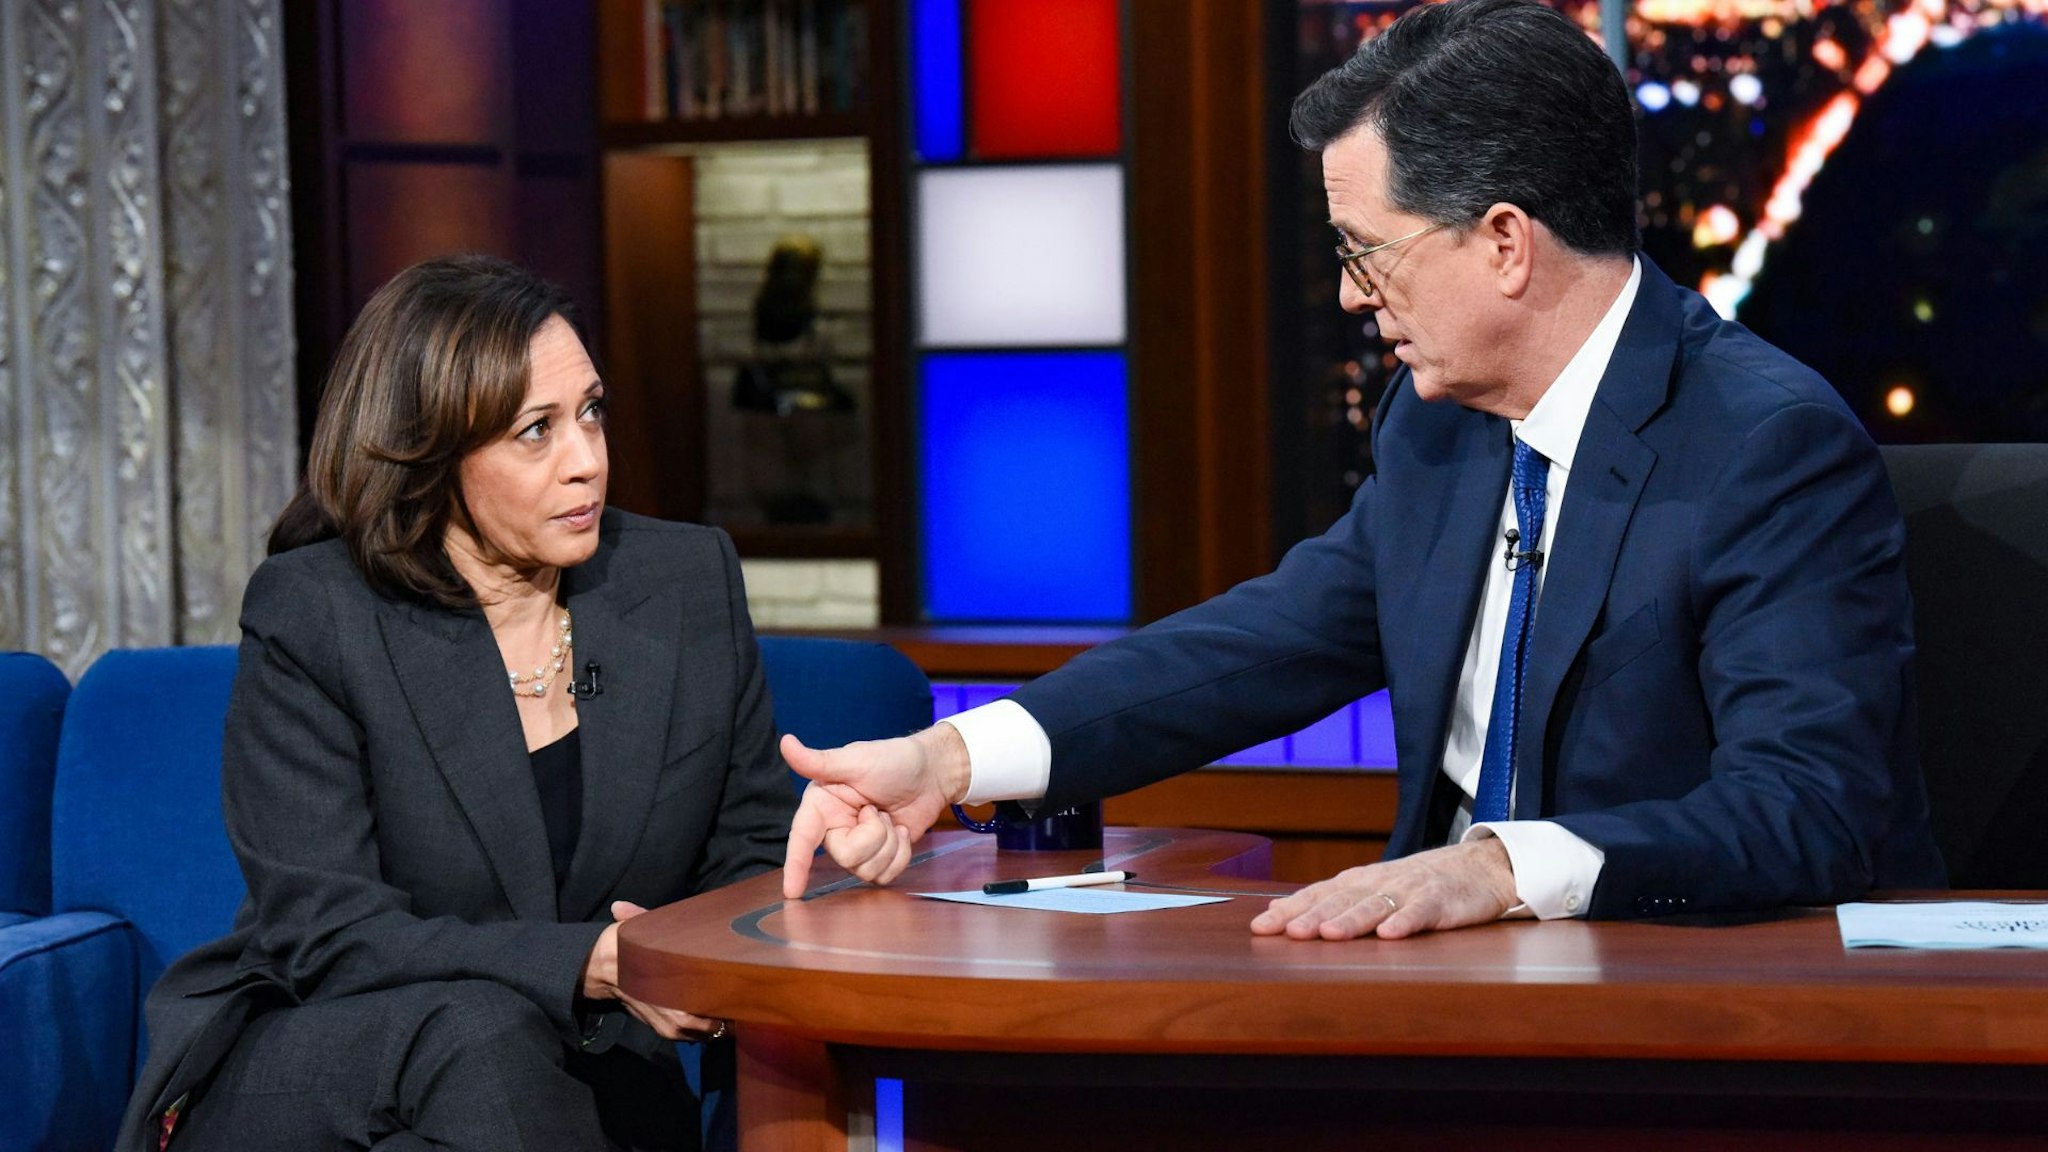 The Late Show with Stephen Colbert and guest Sen. Kamala Harris during Thursday's November 21, 2019 show.